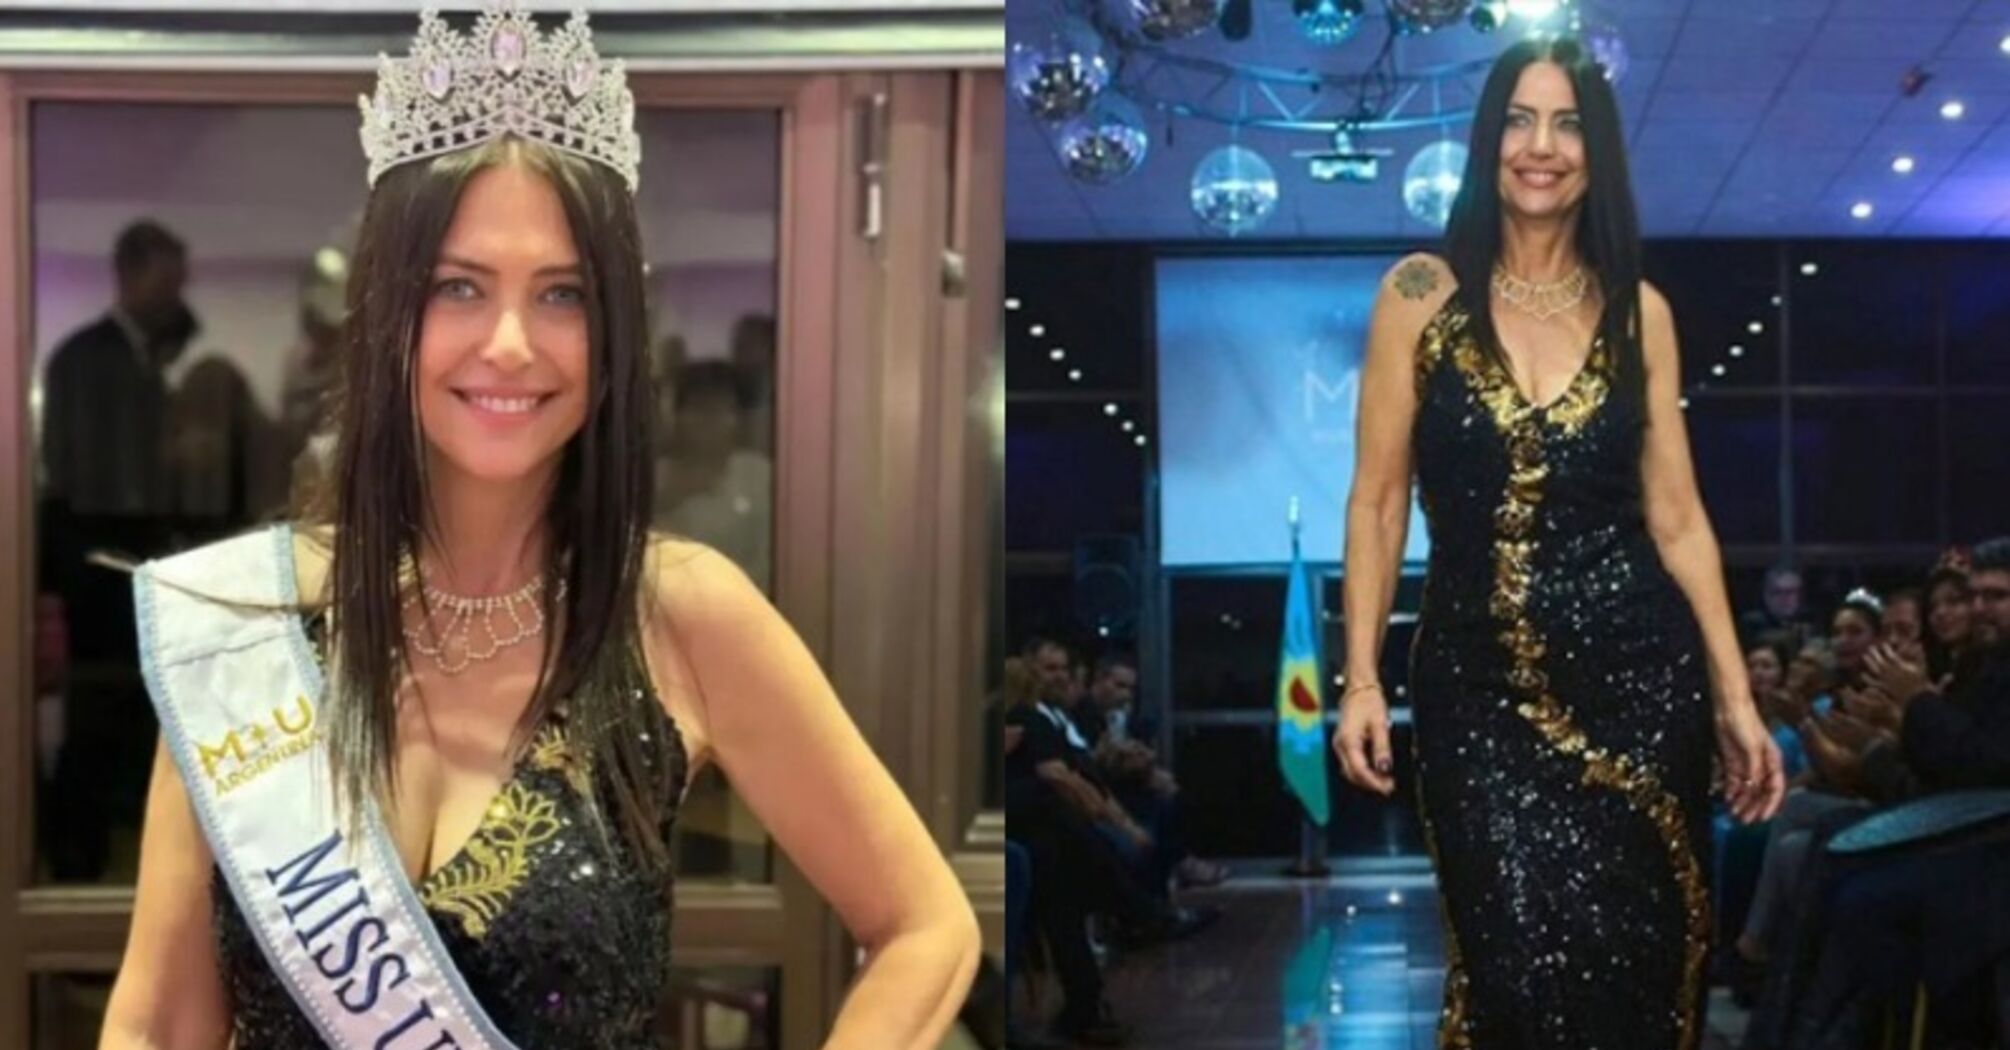 60-year-old woman qualifies for Miss Argentina